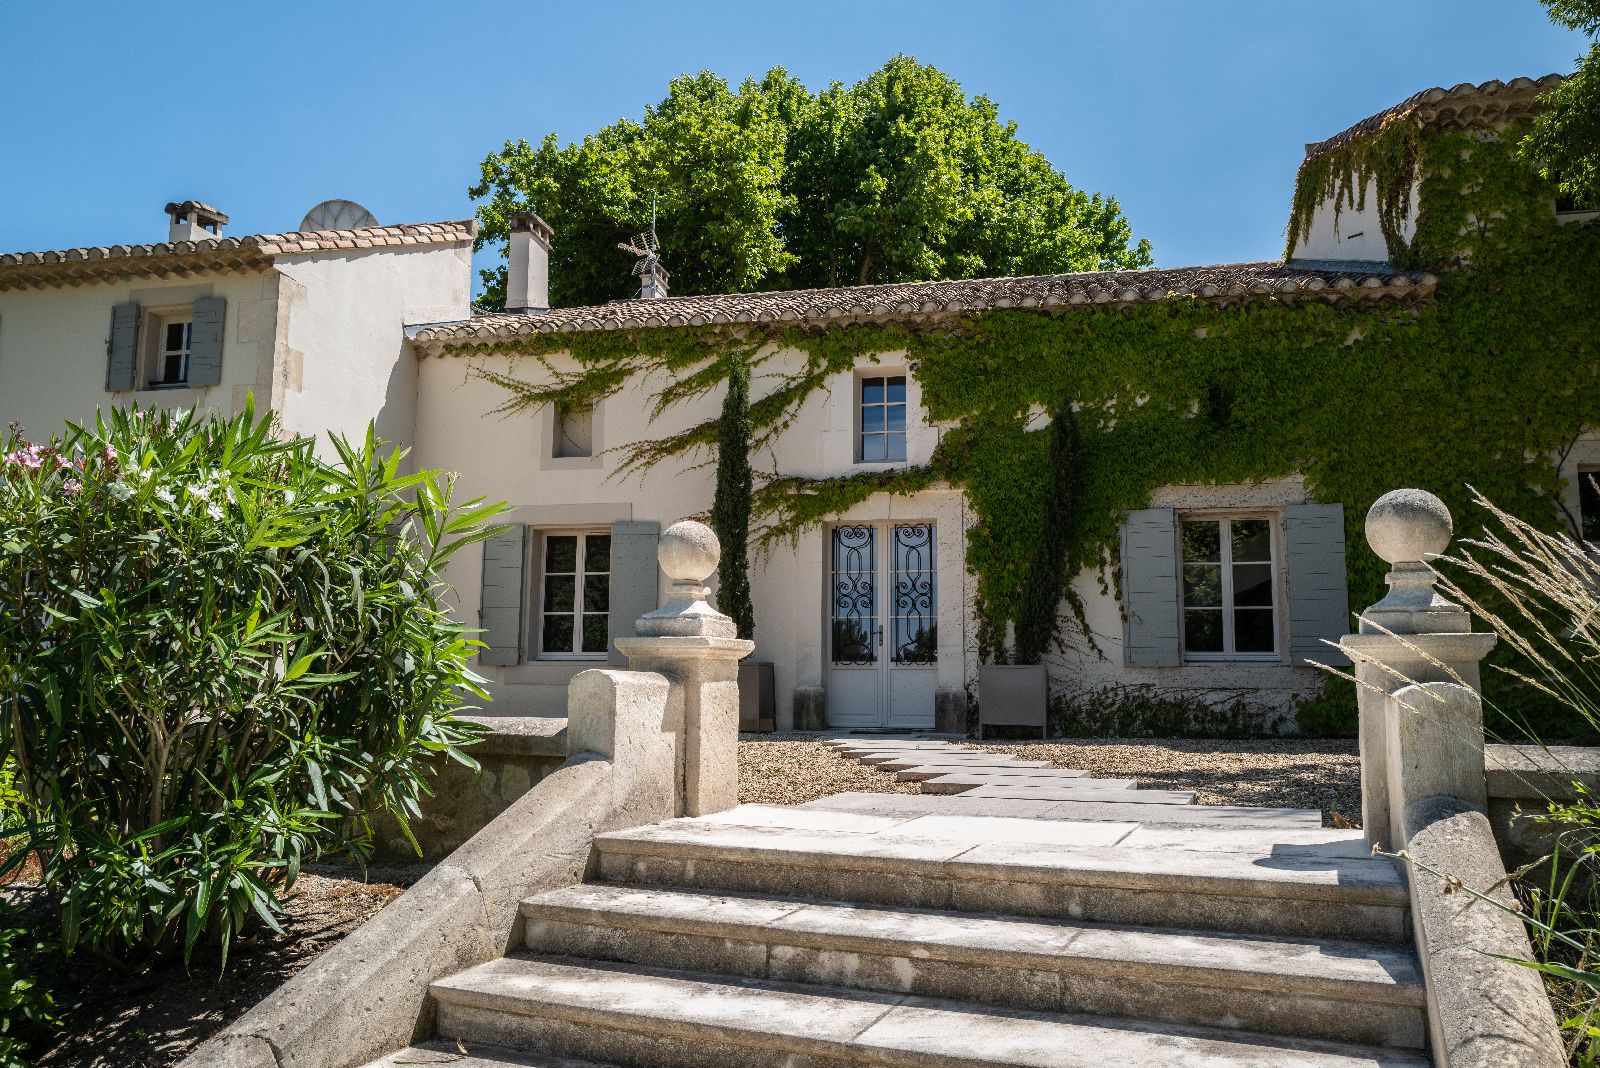 Steps leading to front of villa at Mas Calanquet in Provence